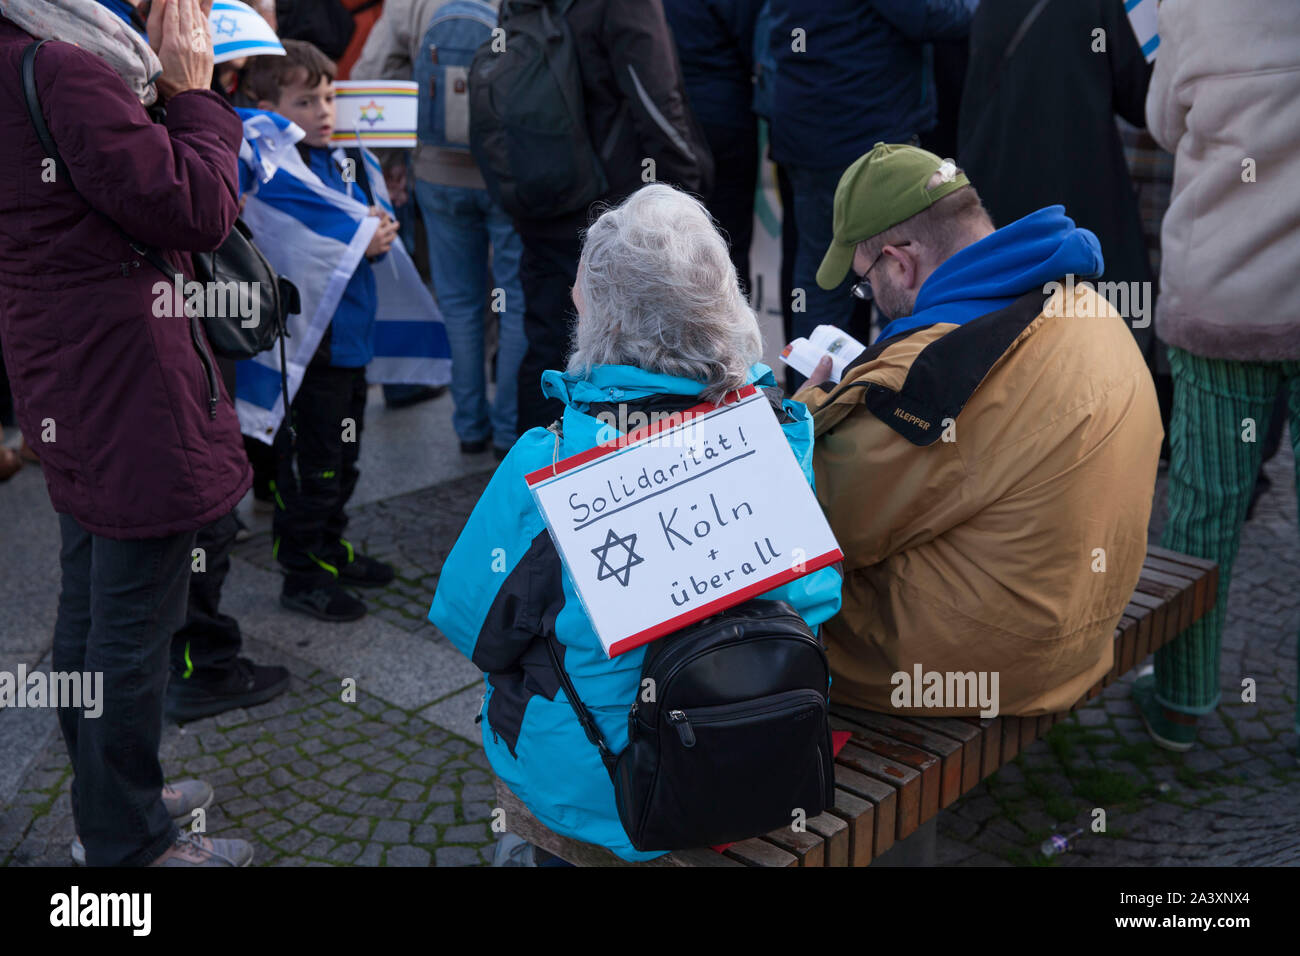 Cologne, Germany, October 10, 2019. After the attack by a right-wing extremist in Halle (Saale), politicians, churches and Muslims demonstrate their s Stock Photo